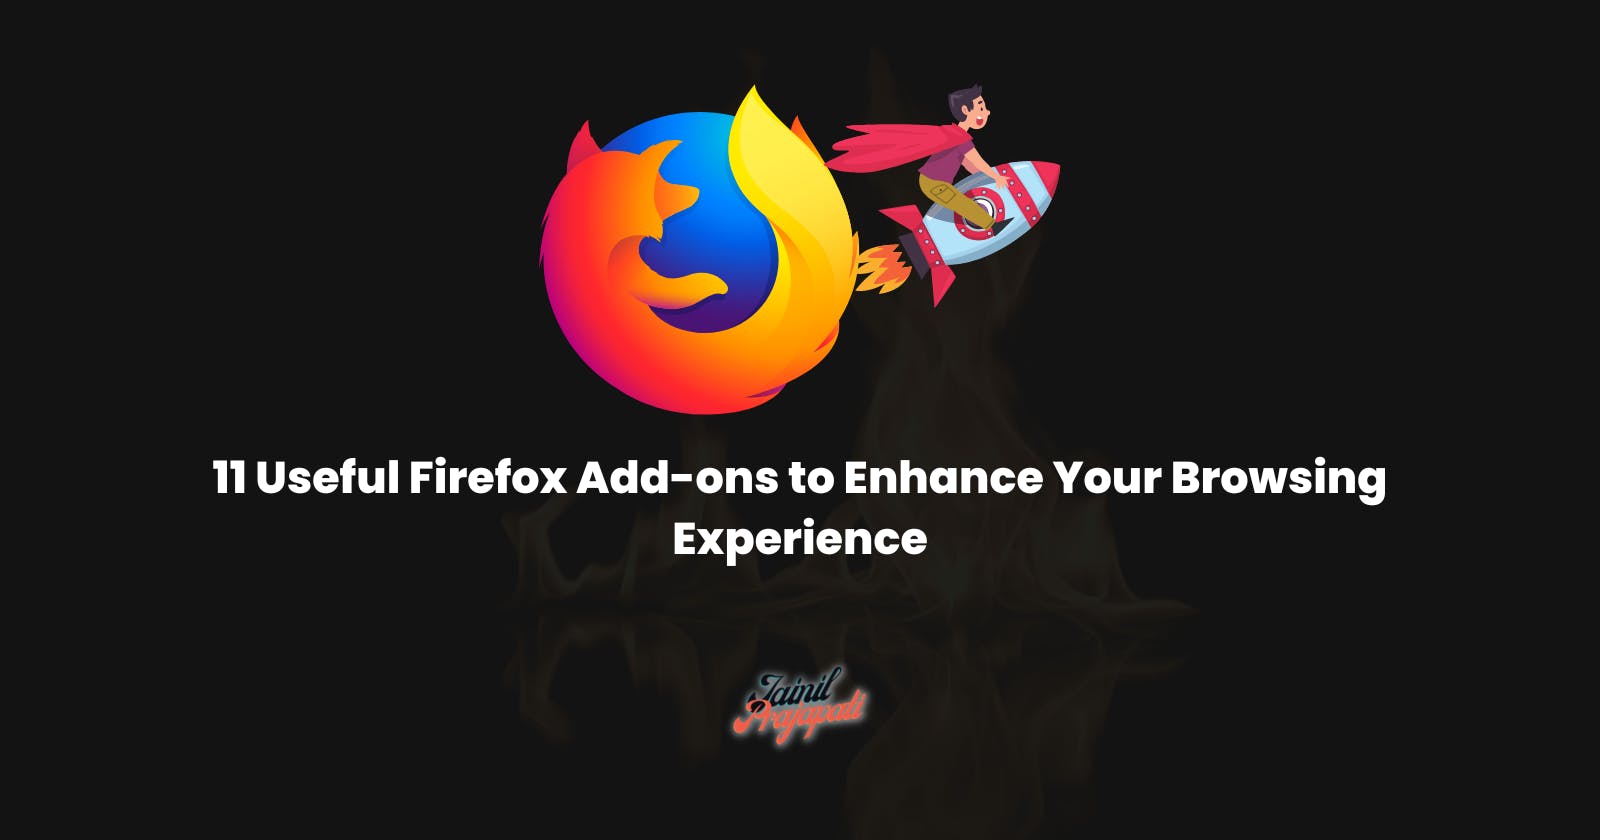 11 Useful Firefox Add-ons to Enhance Your Browsing